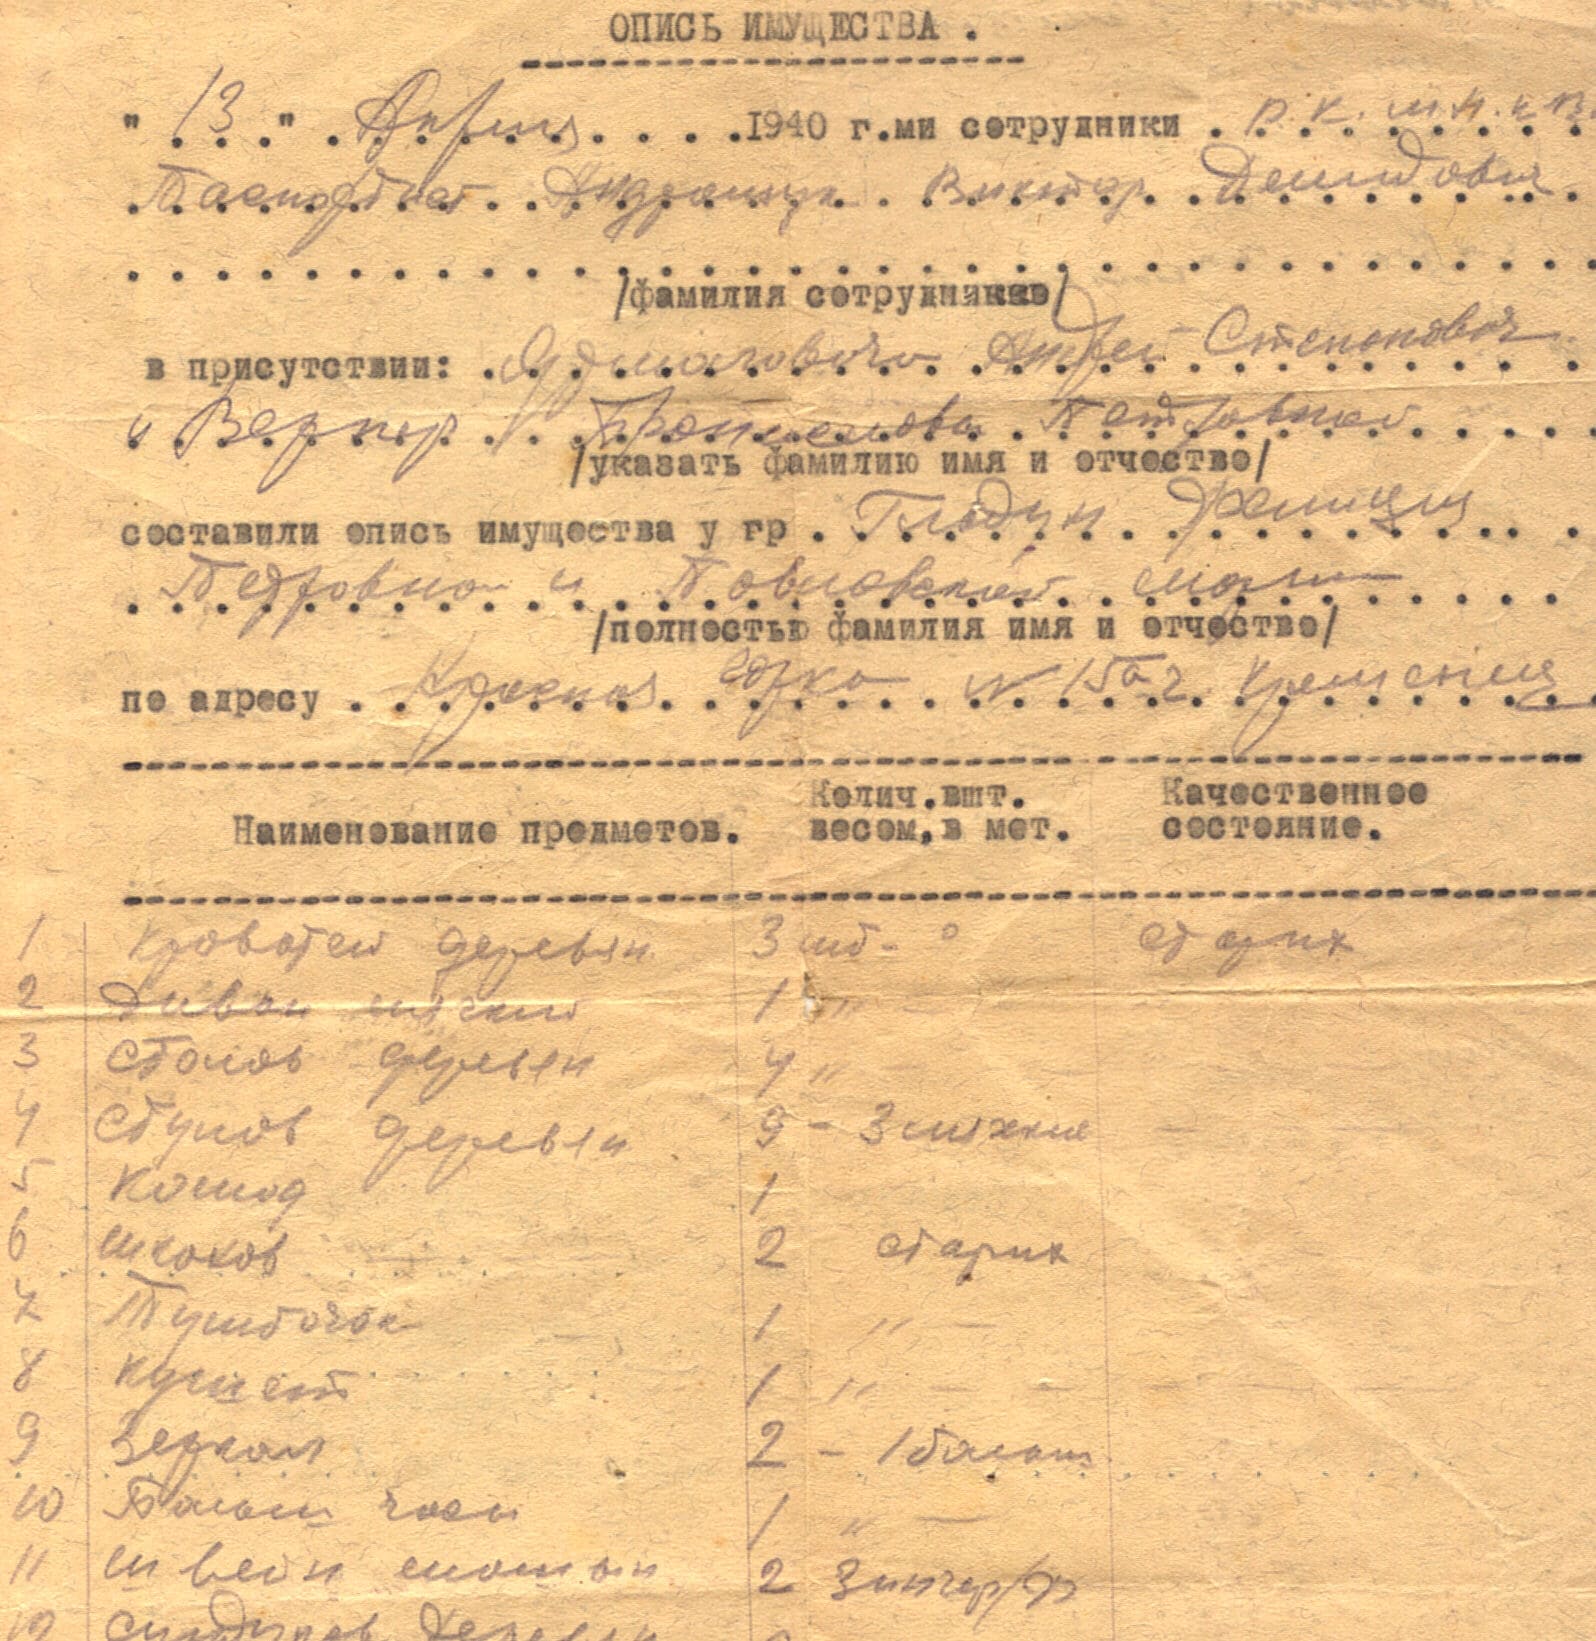 NKVD "Receipt" for property stolen or sold at low prices to the Soviets and their collaborators.